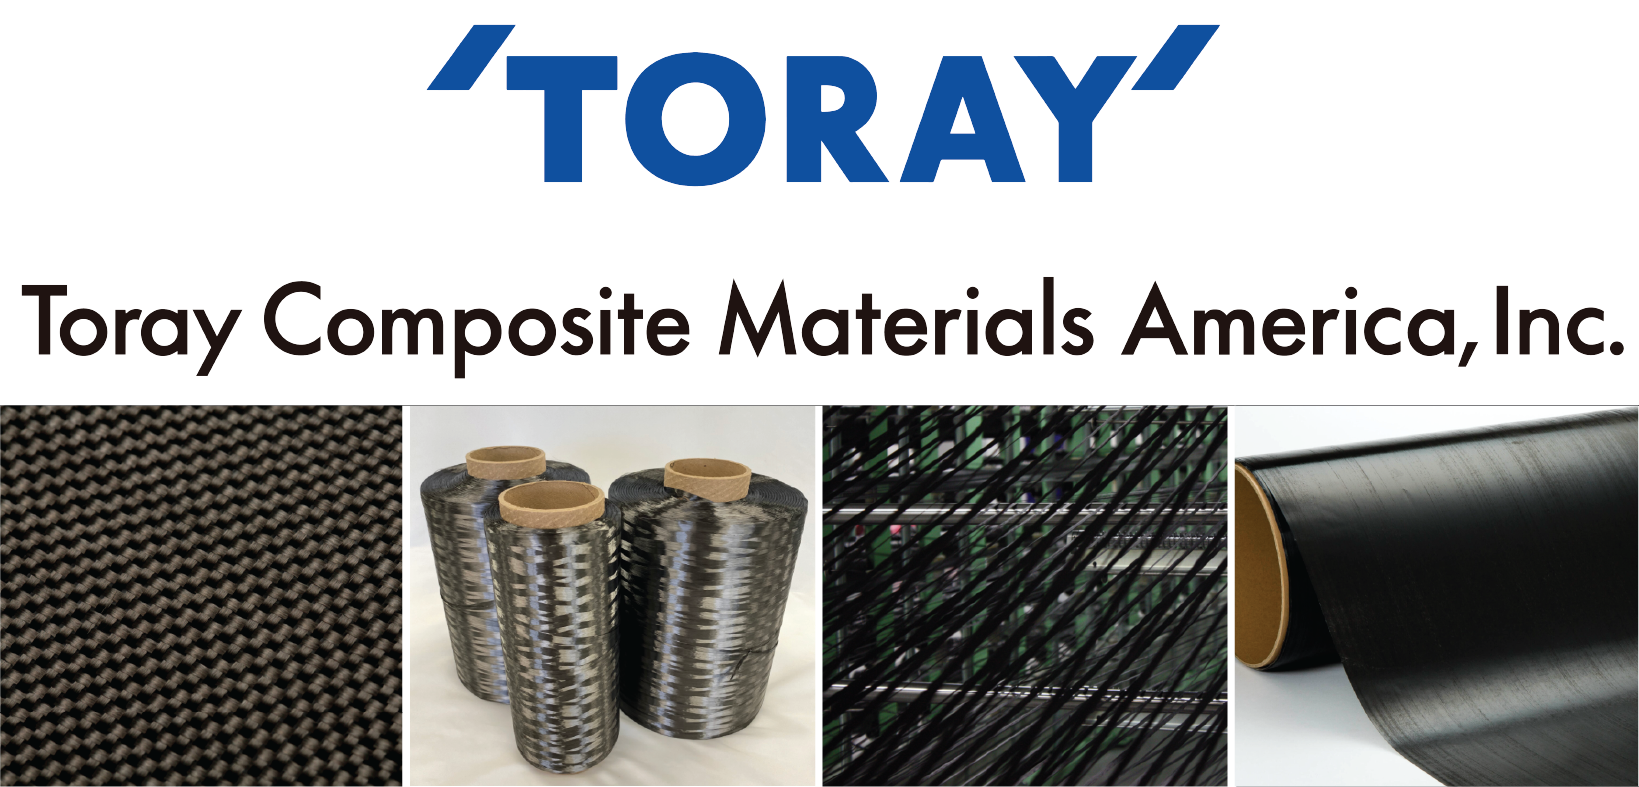 Toray Announces the Launch of Flexible and Highly Adaptive 2700 Prepreg